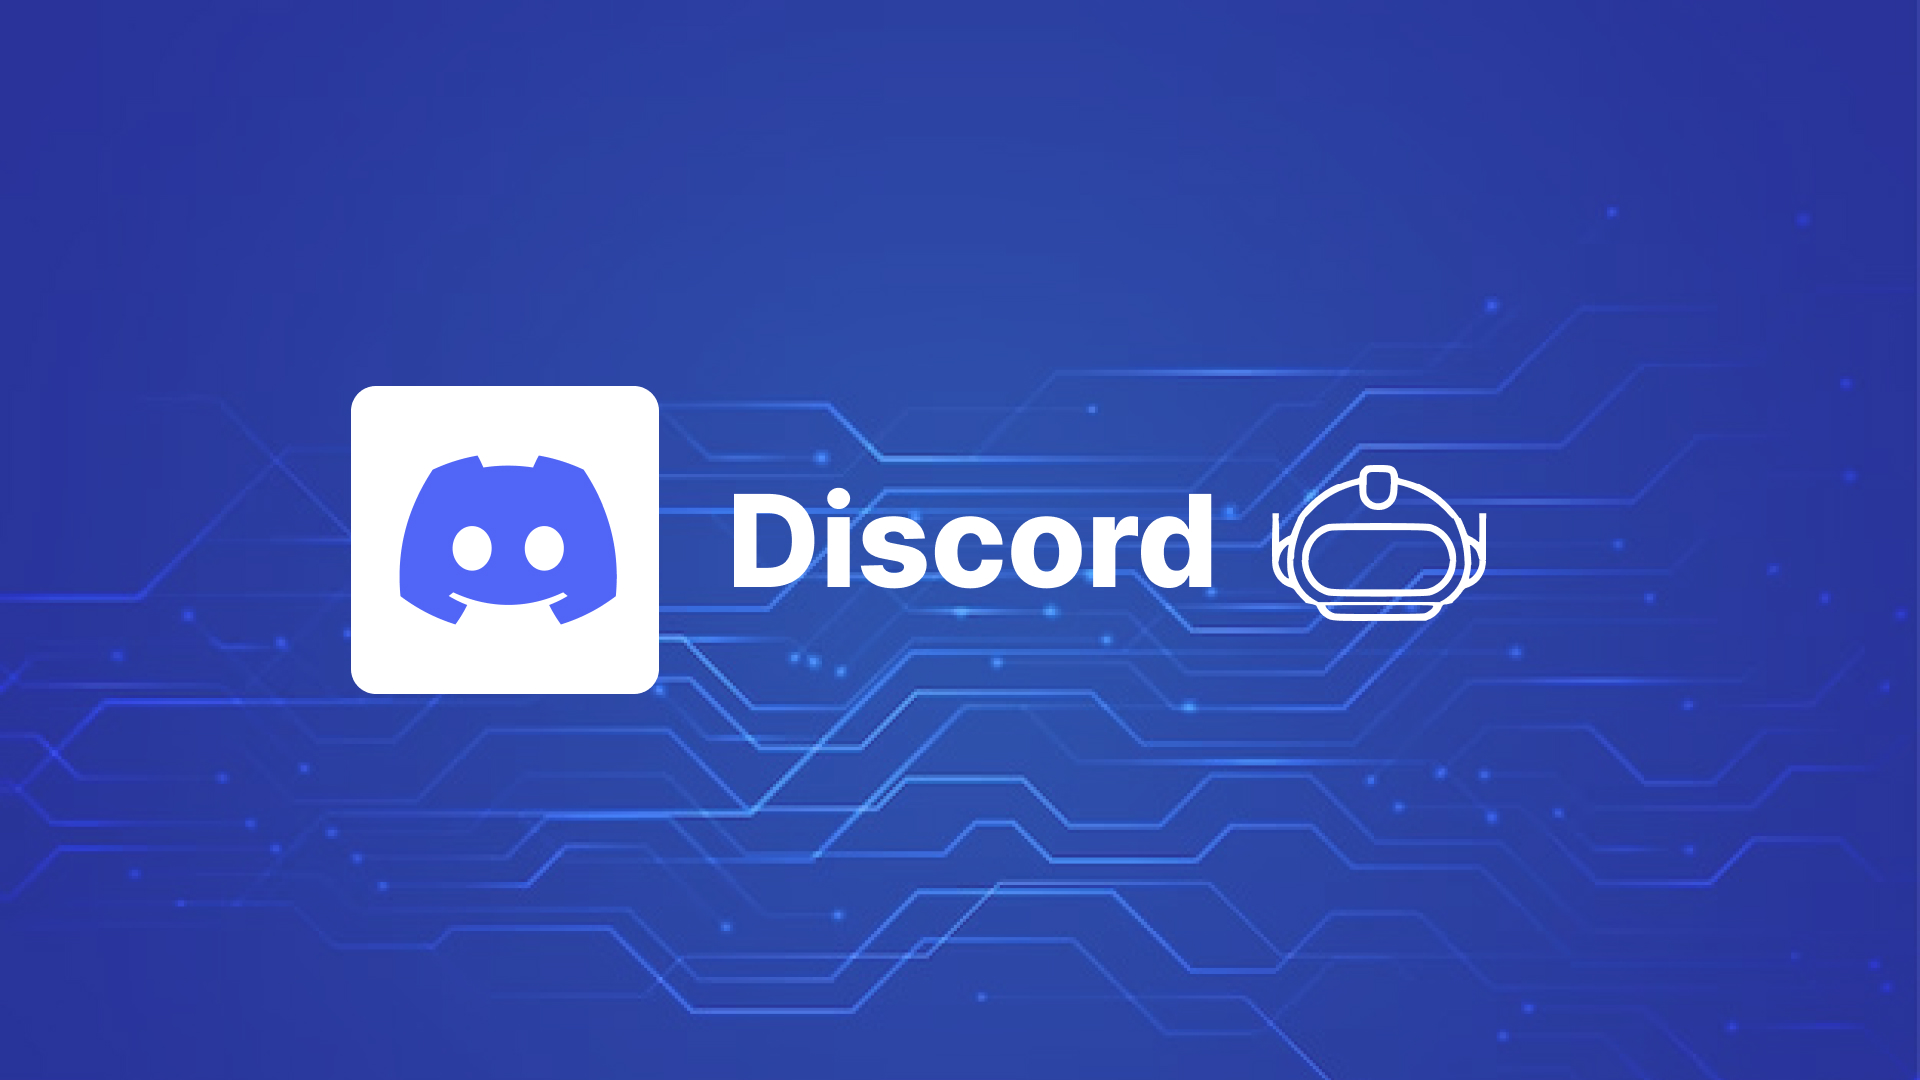 How to Make a Discord Bot